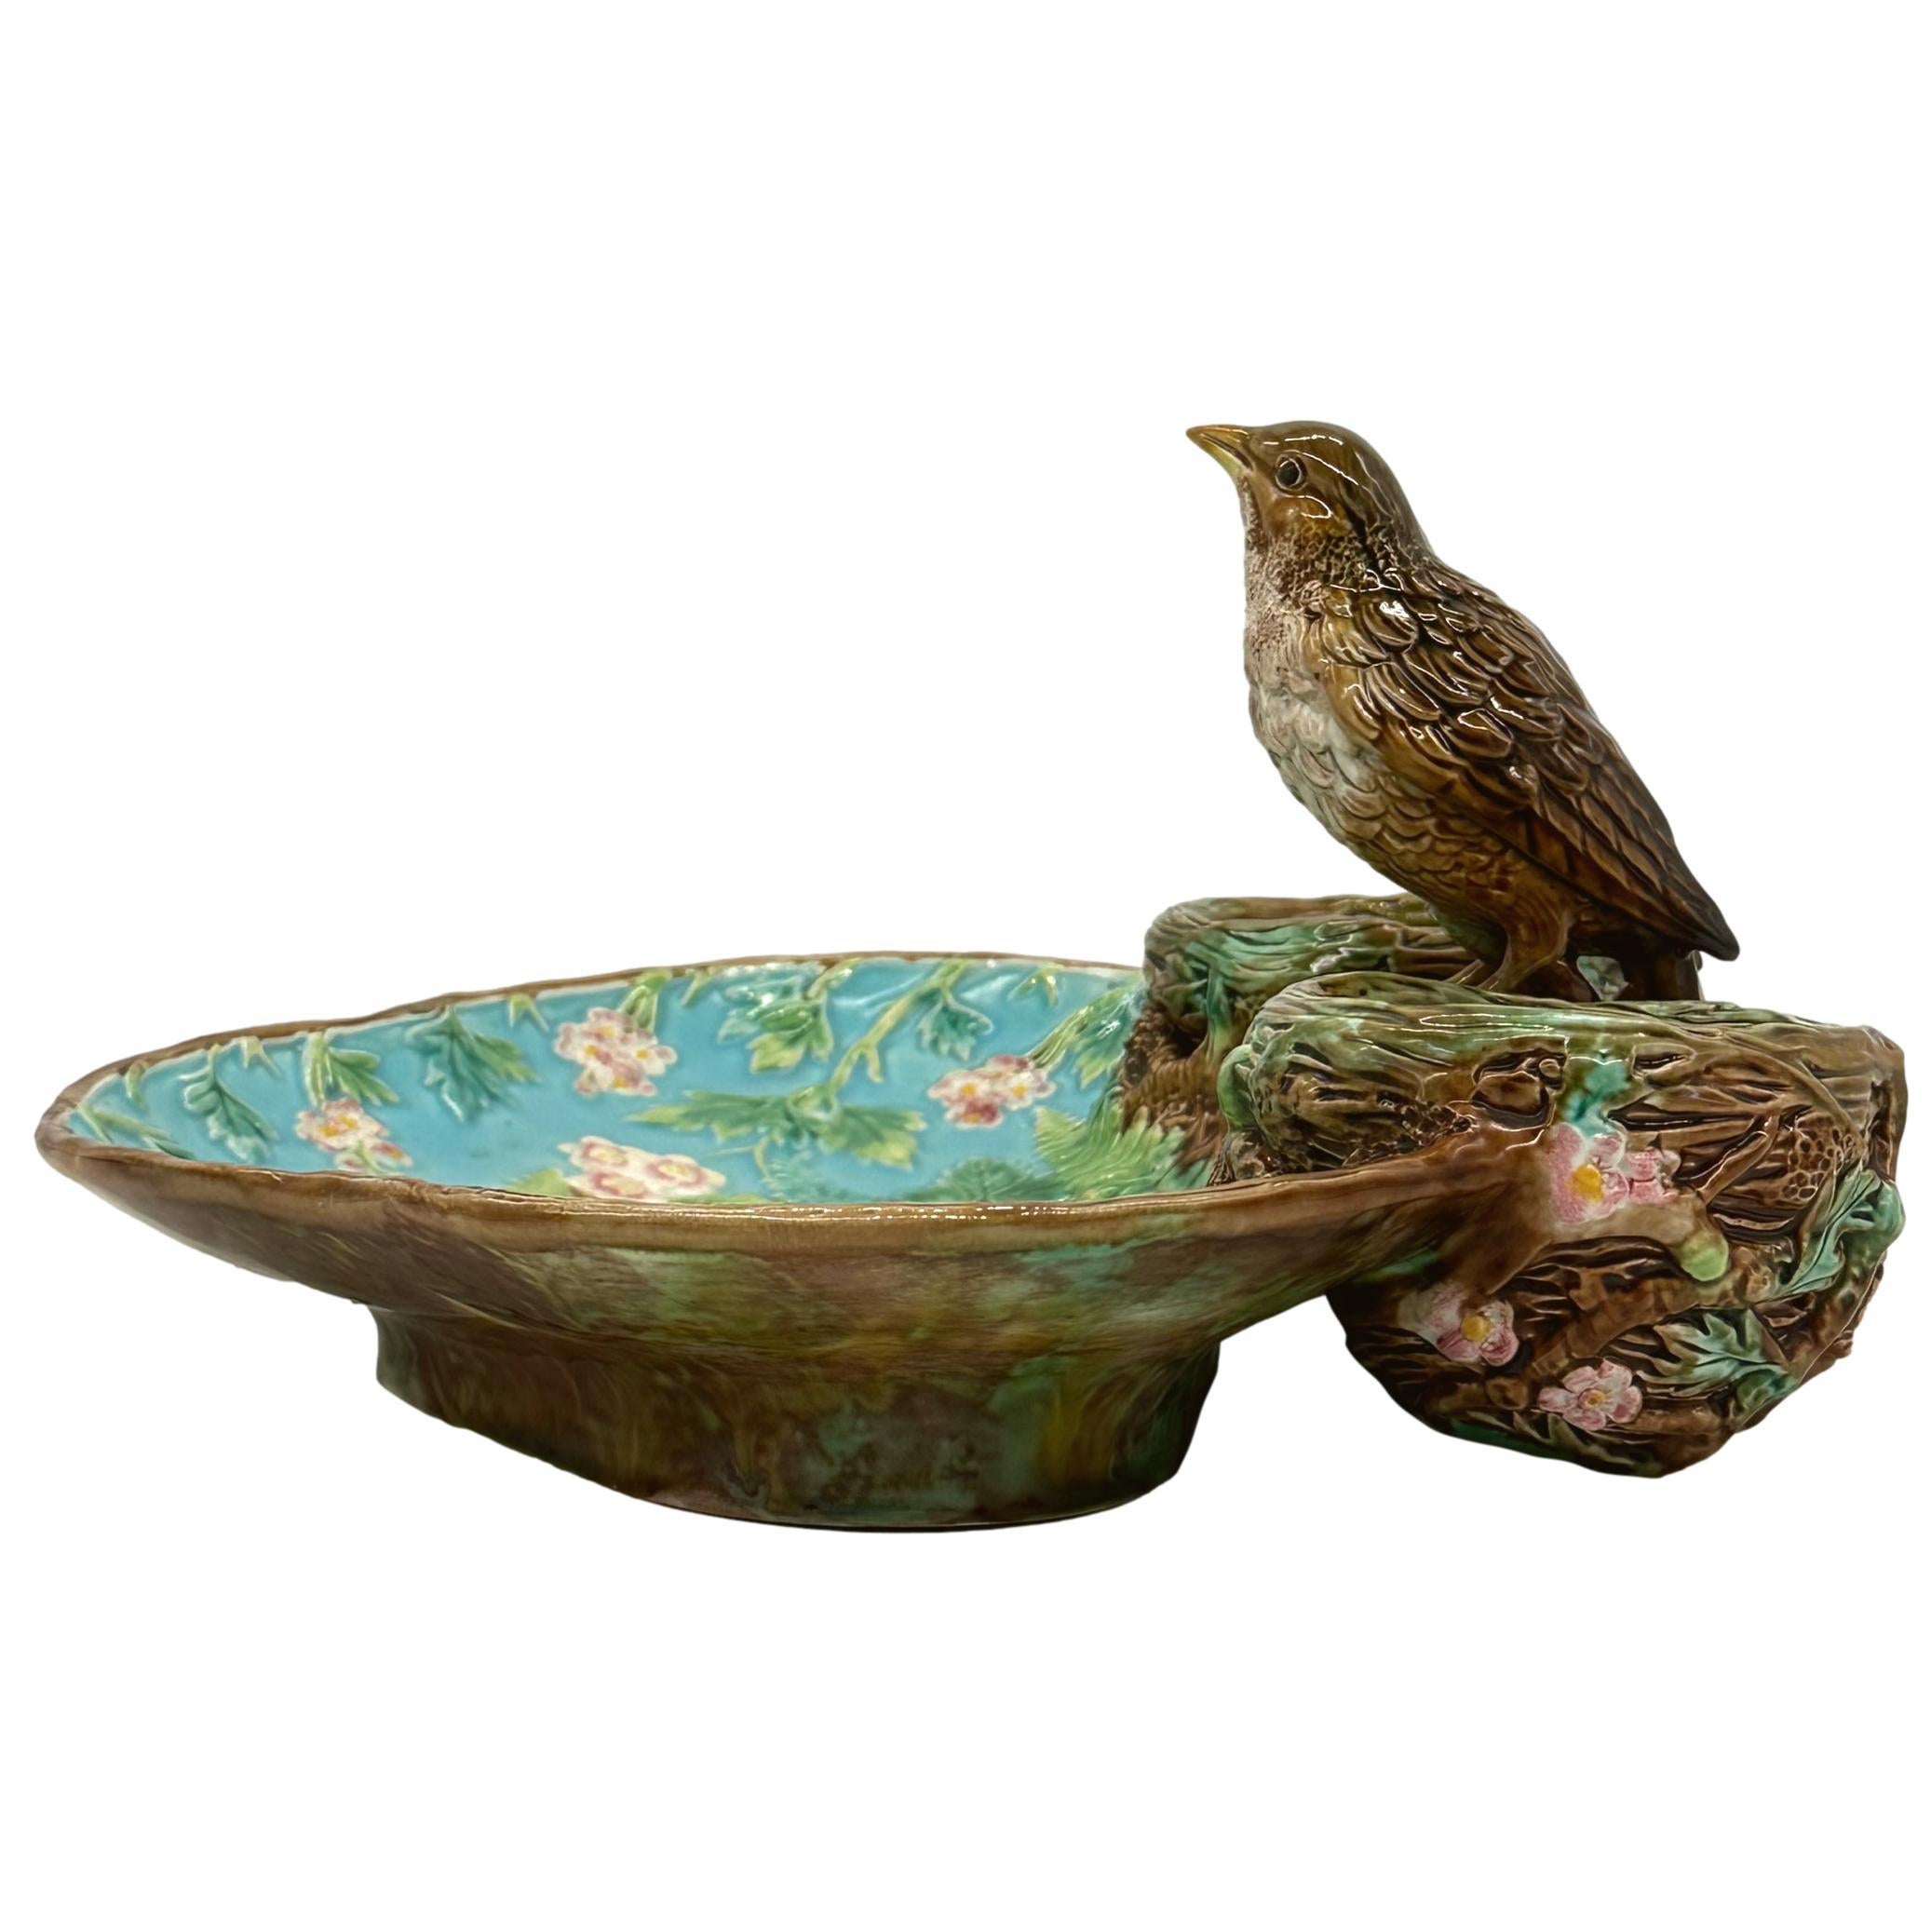 George Jones Majolica Strawberry Server, ca. 1870, the trefoil dish naturalistically moldelled with blossoming strawberry plants and ferns on a turquoise and rustic ground, surmounted by a life-Size Thrush perched on simulated branches between two